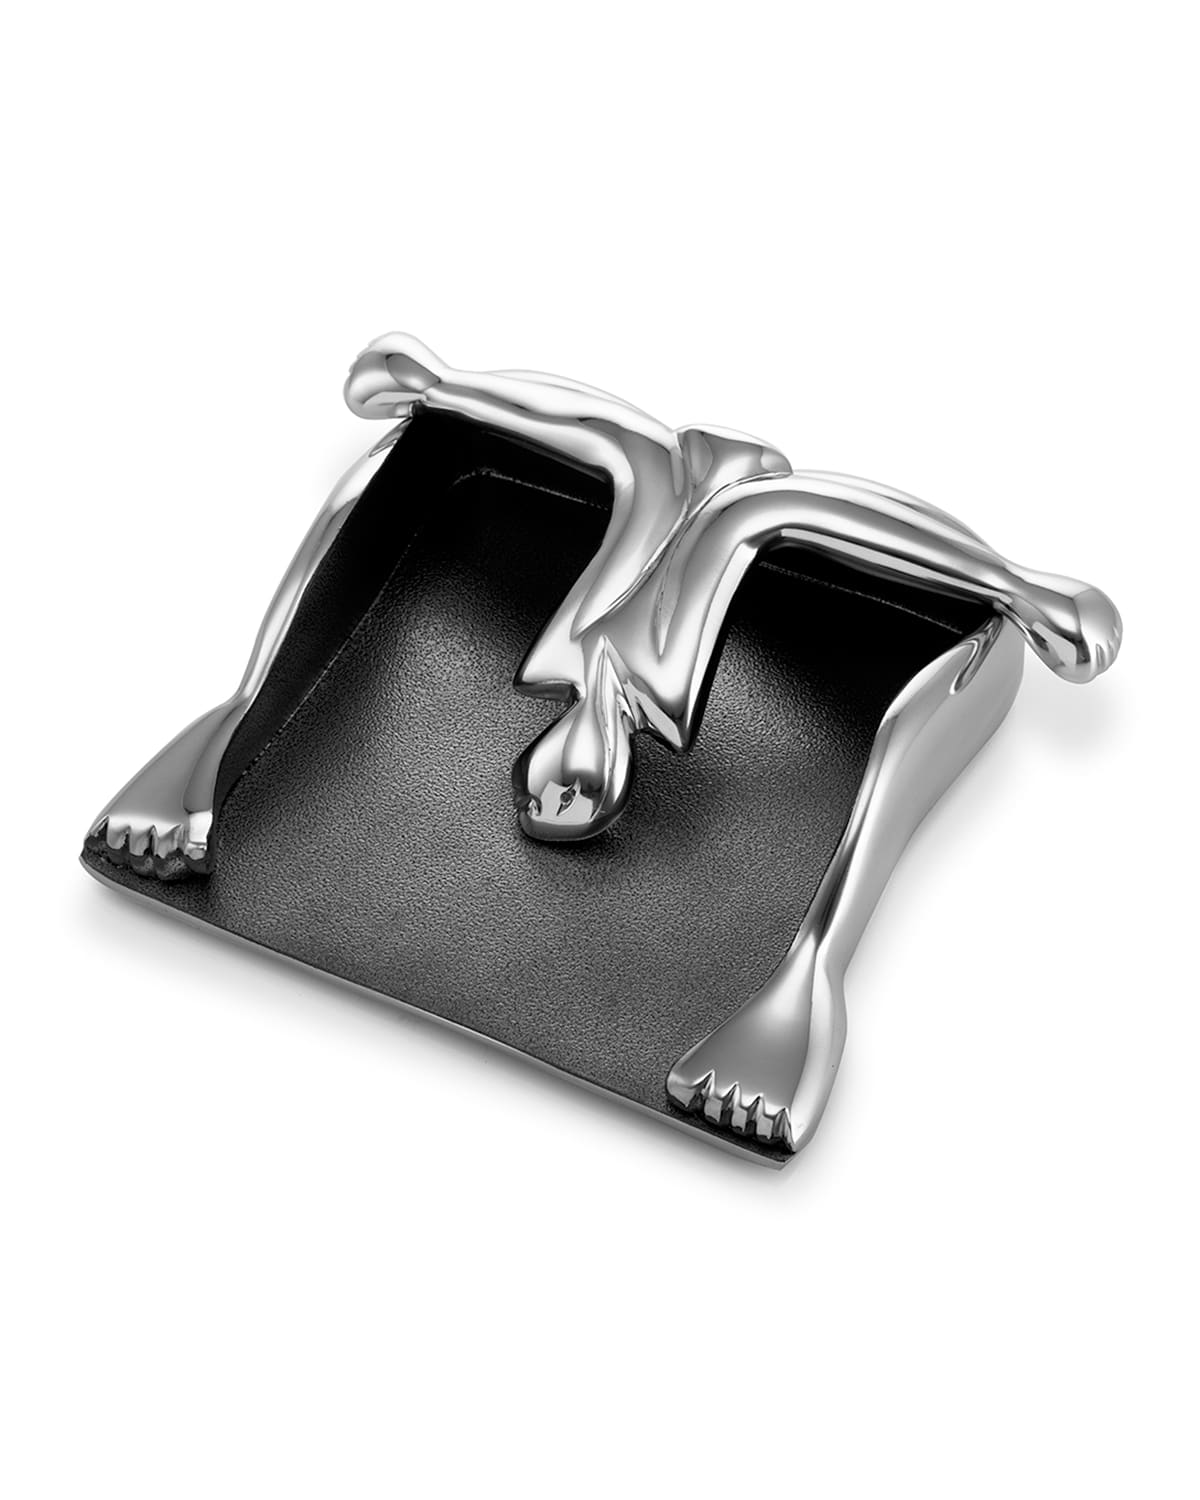 Carrol Boyes Take A Bow Indoor/outdoor Napkin Holder